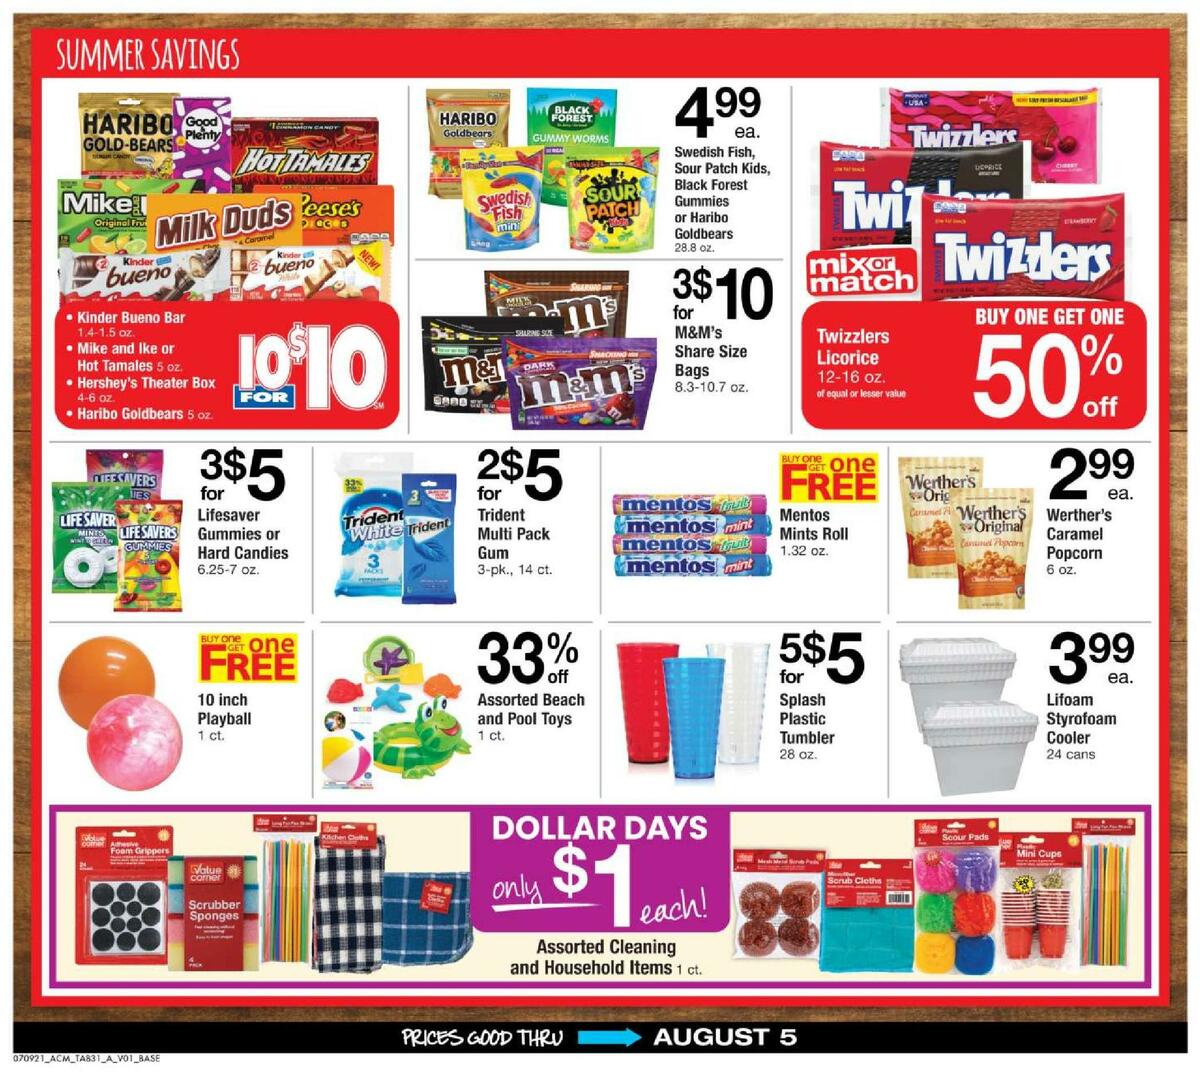 ACME Markets Big Book of Savings Weekly Ad from July 9